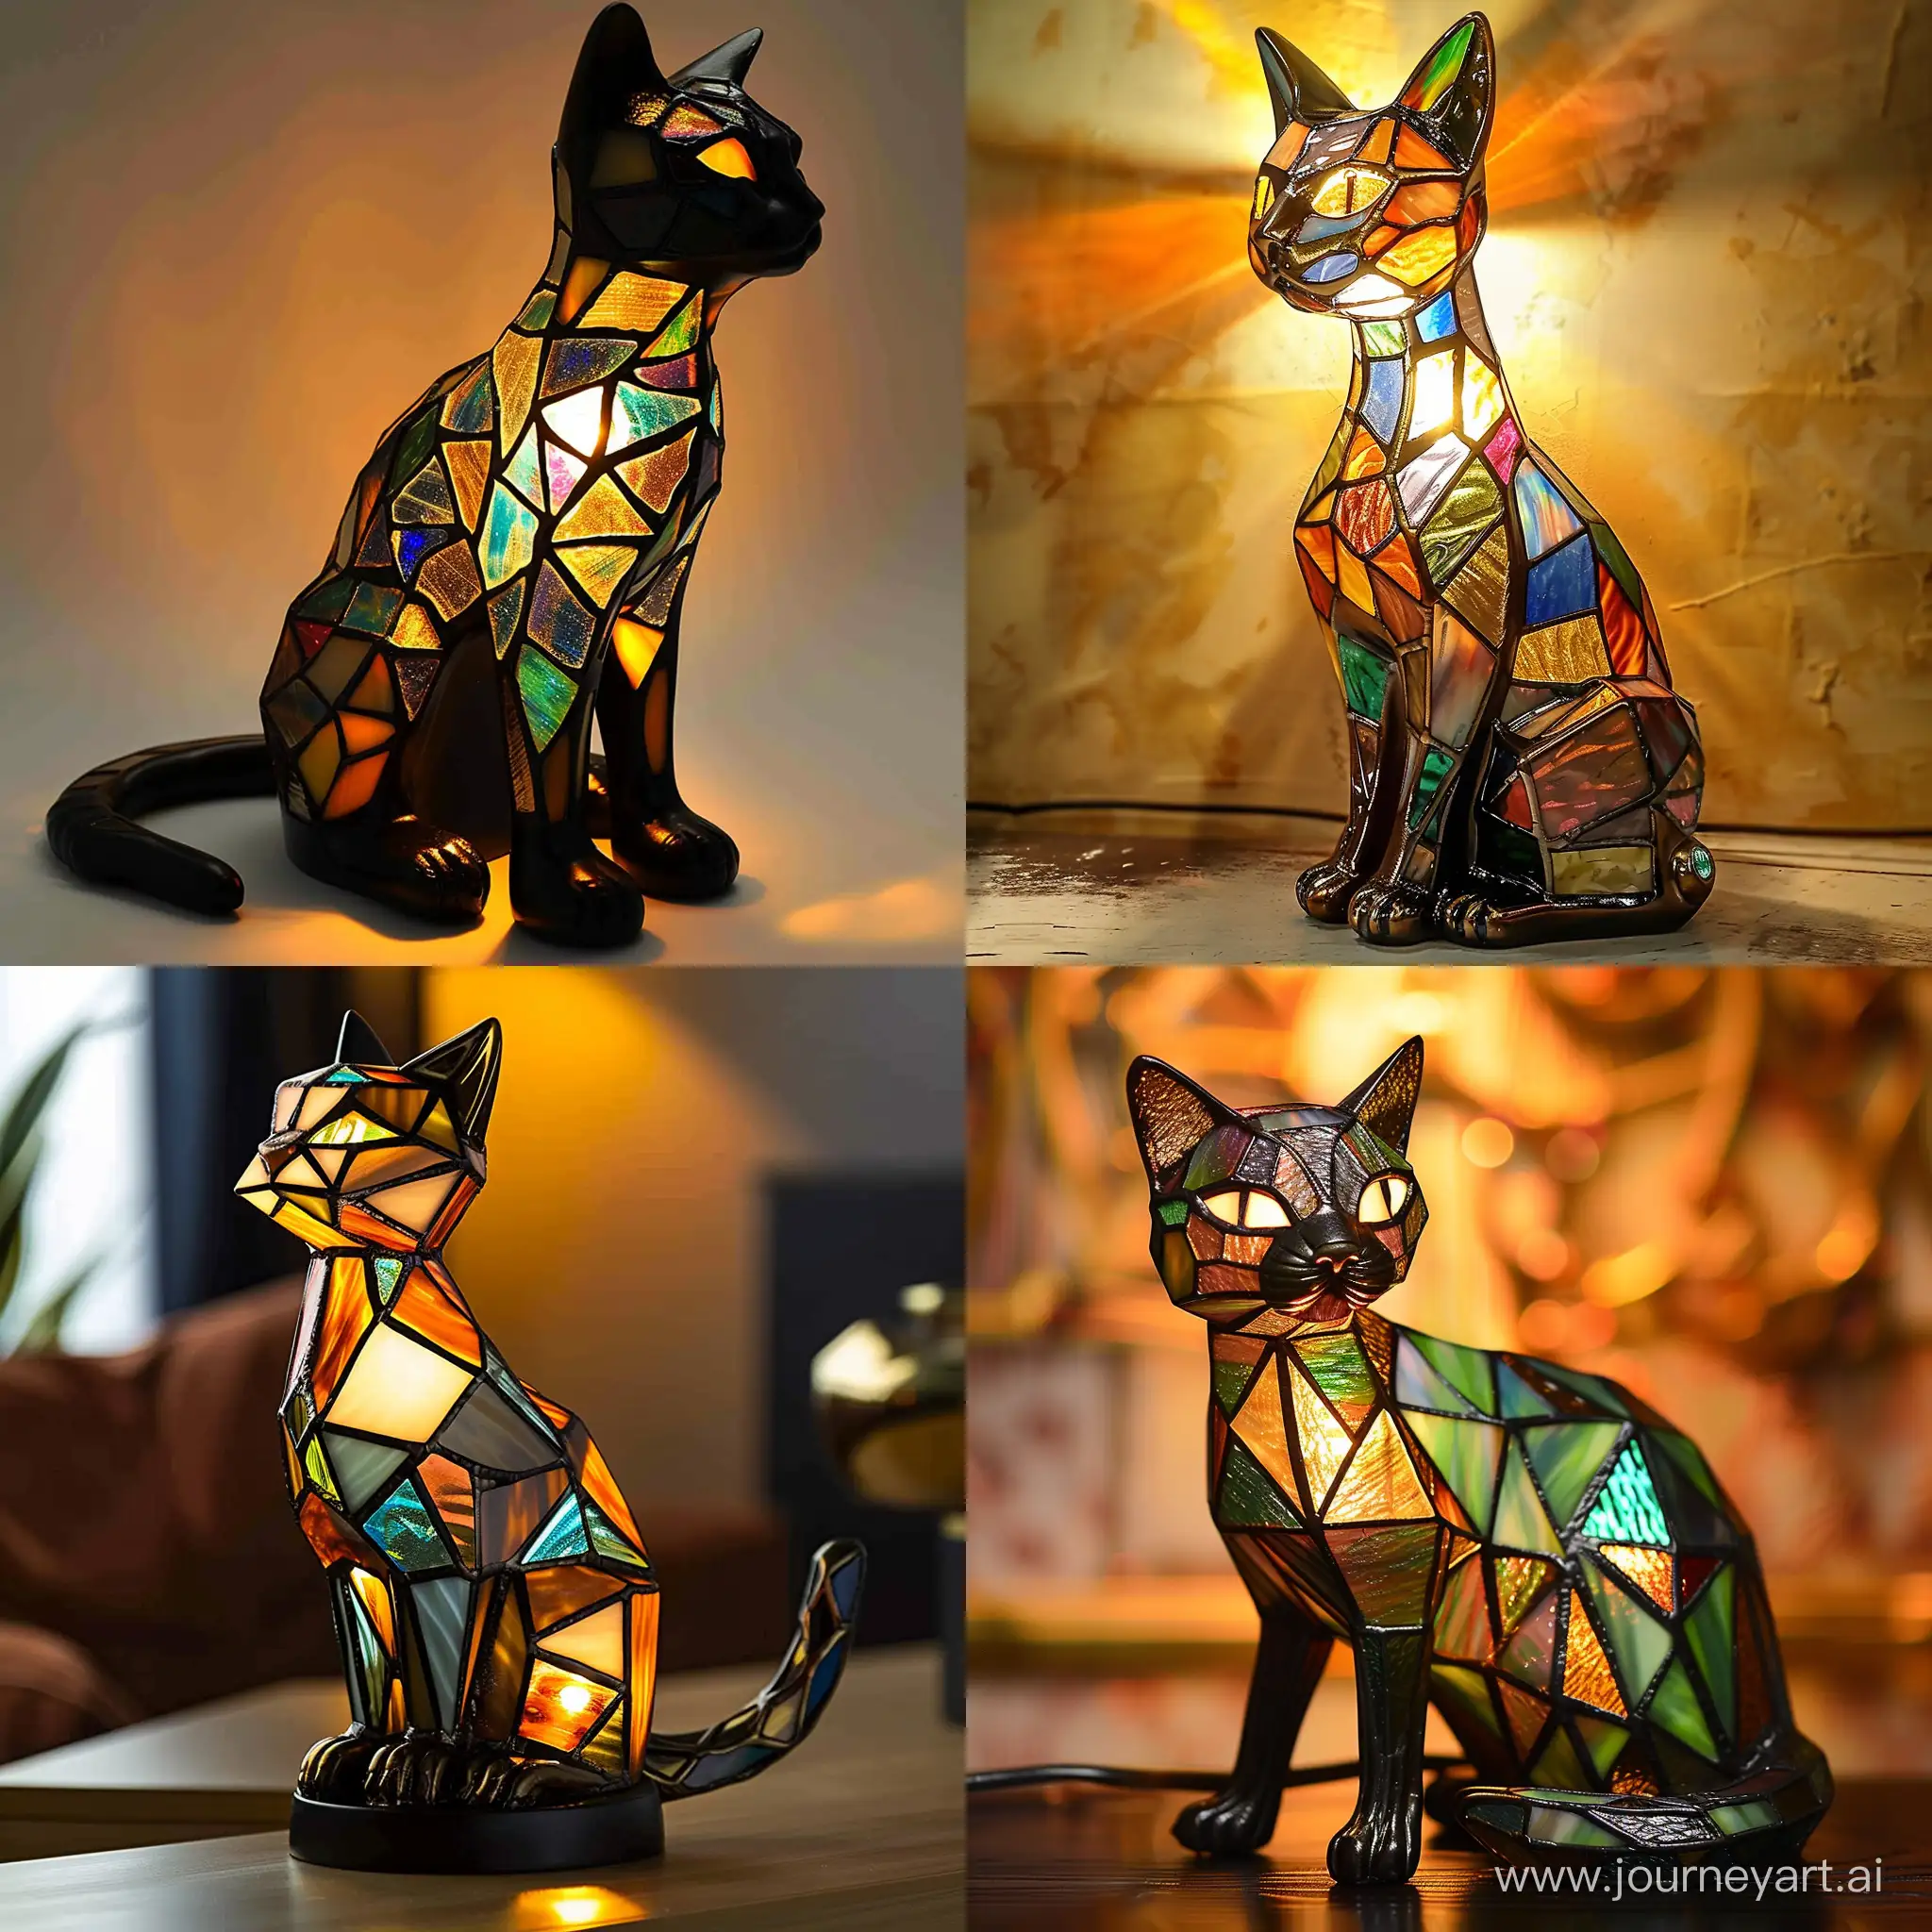 CatShaped-Desk-Lamp-with-Colored-Stained-Glass